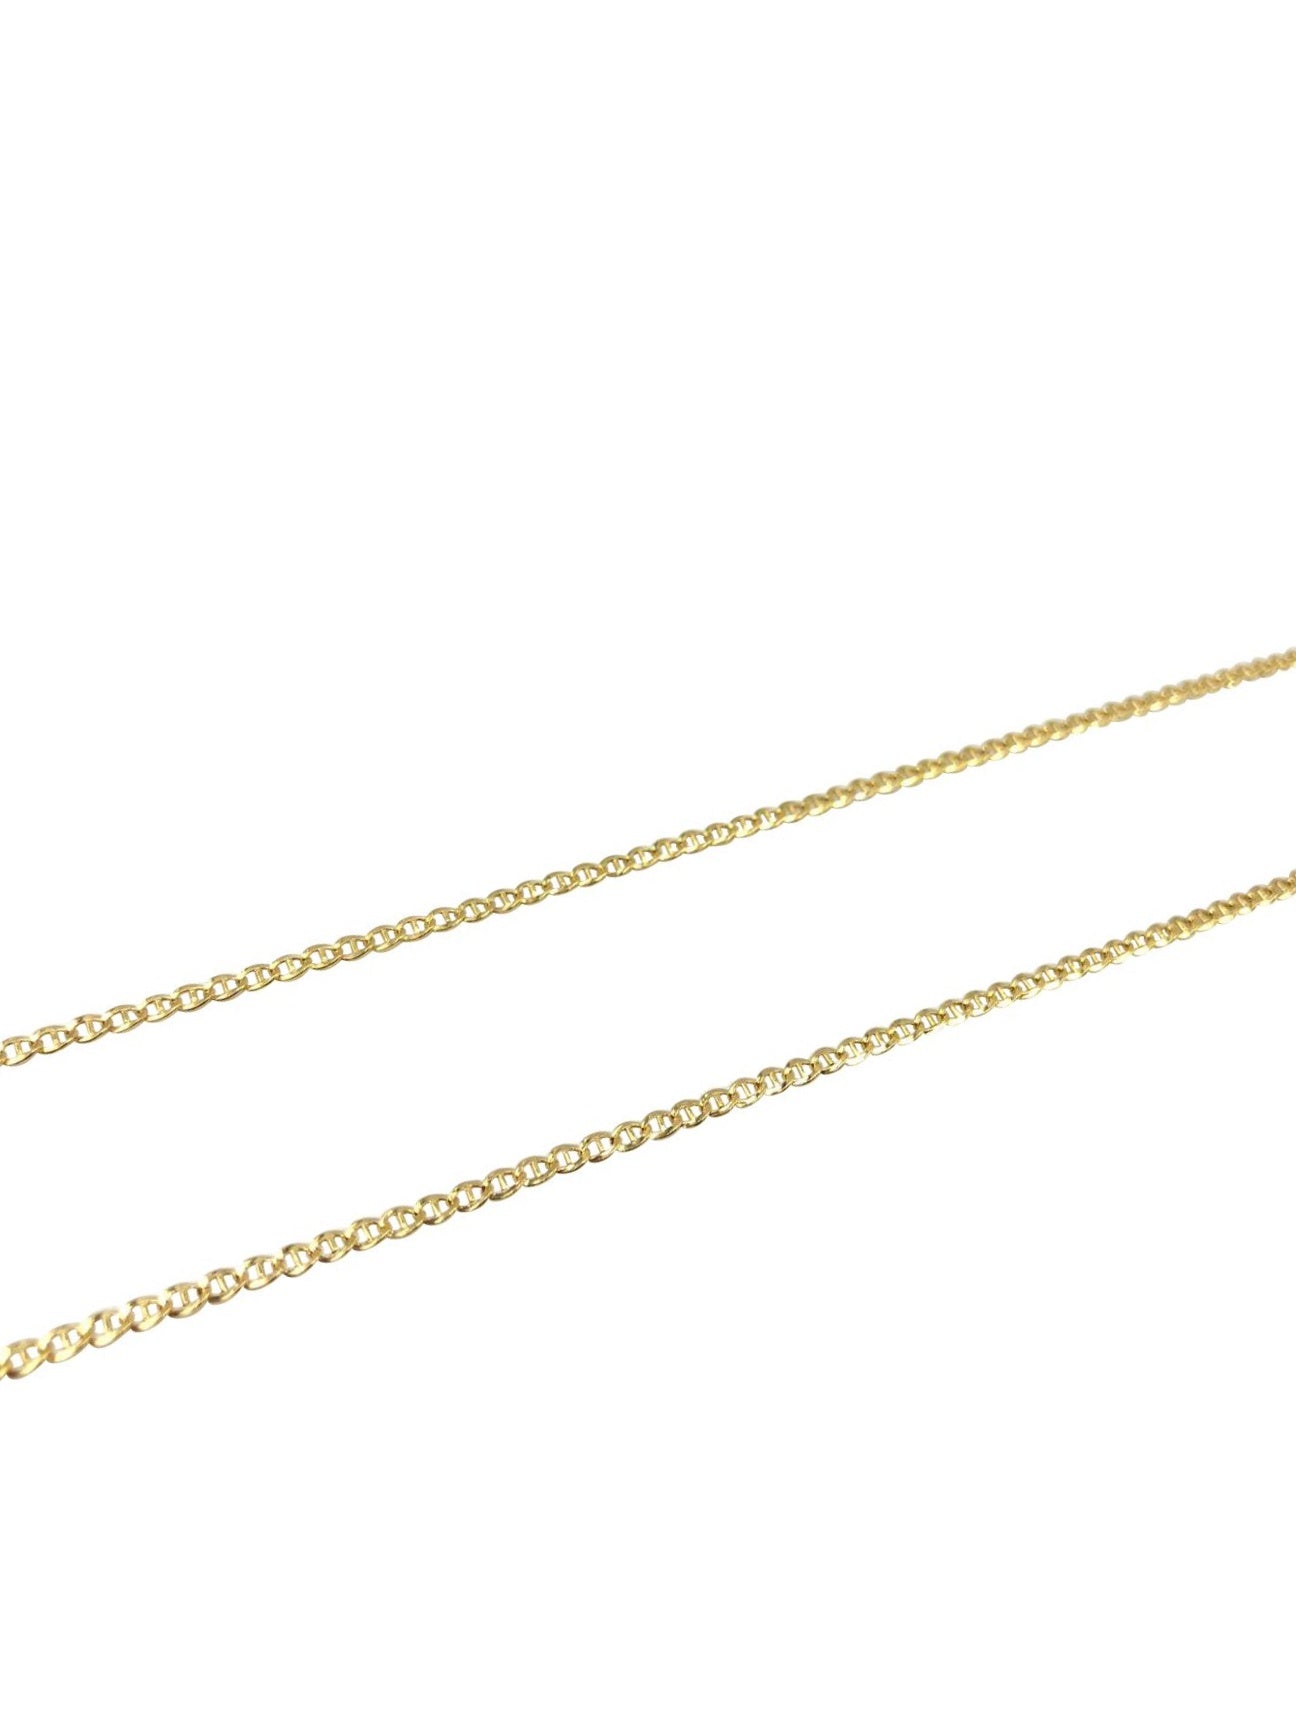 the perfect jewelry to layer it with other chains